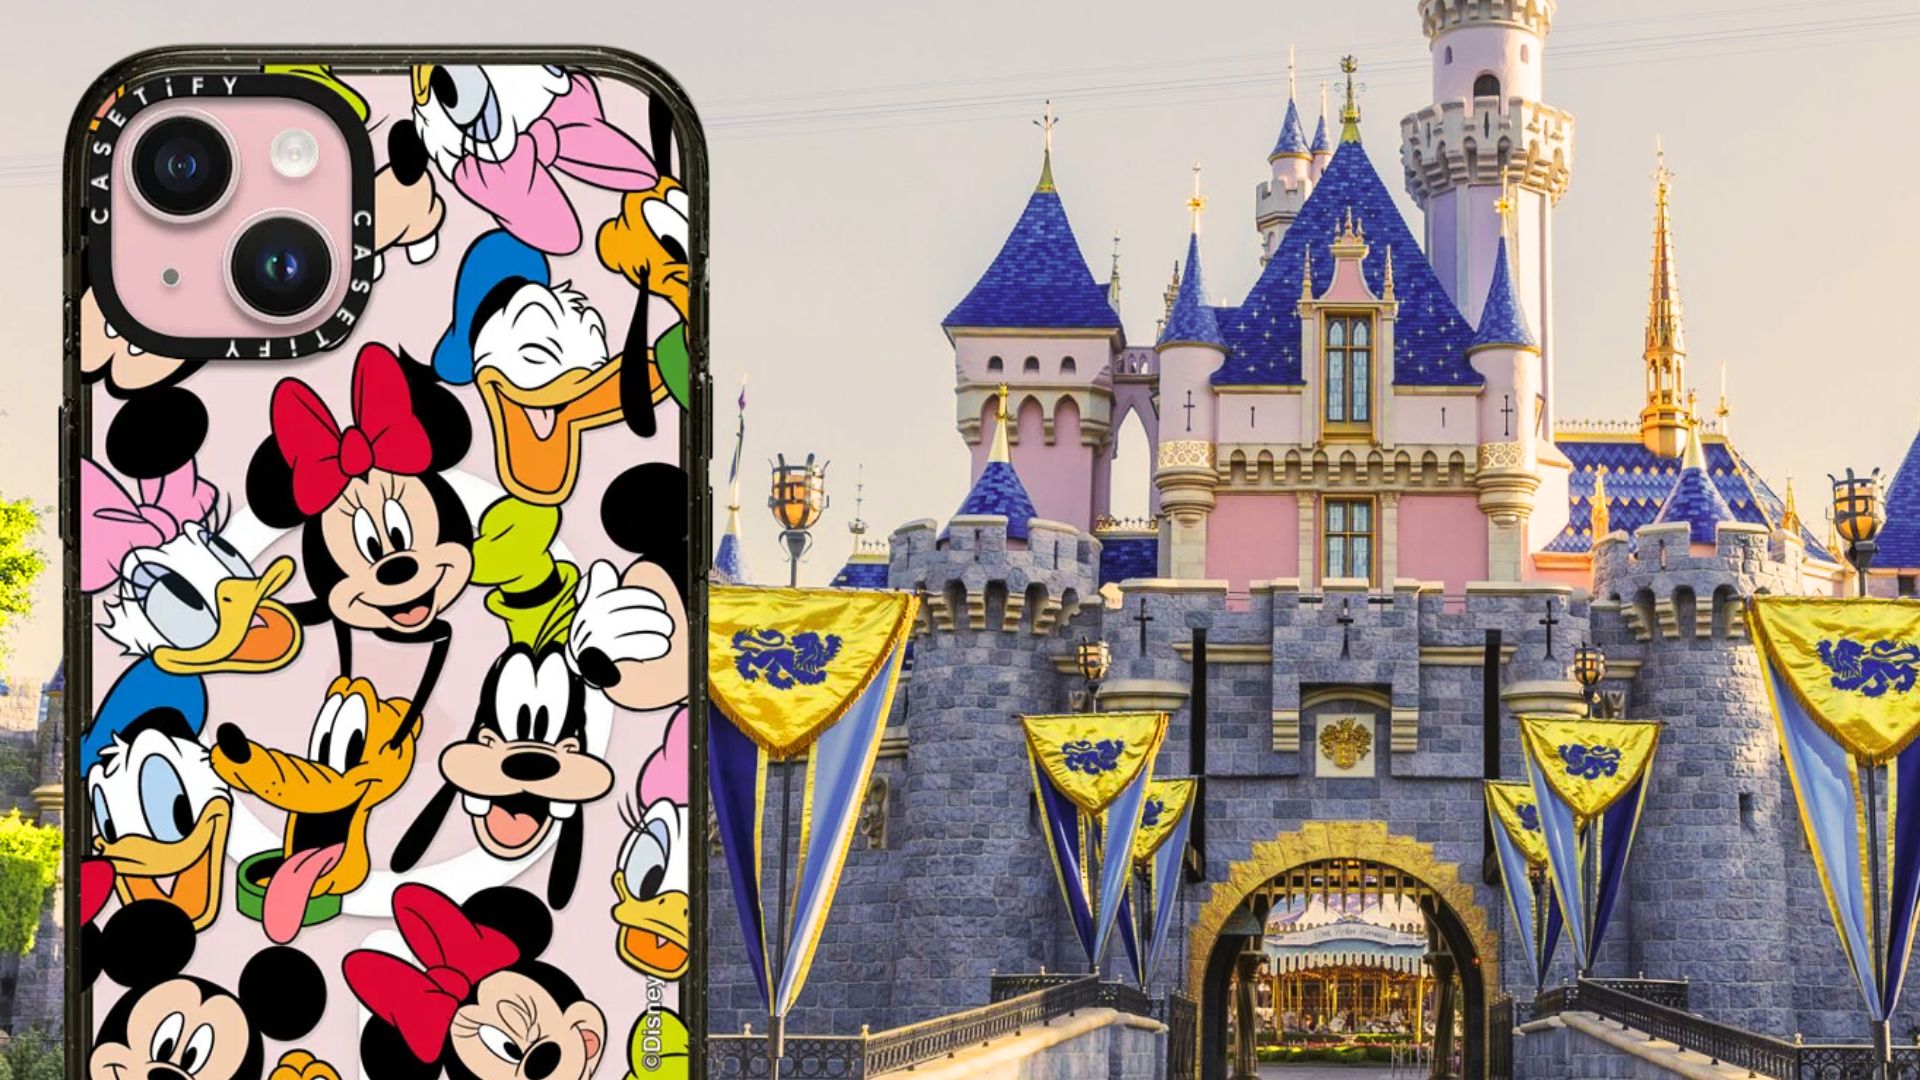 Using the iPhone 15 Plus at Disneyland convinced me it's the best phone for most people